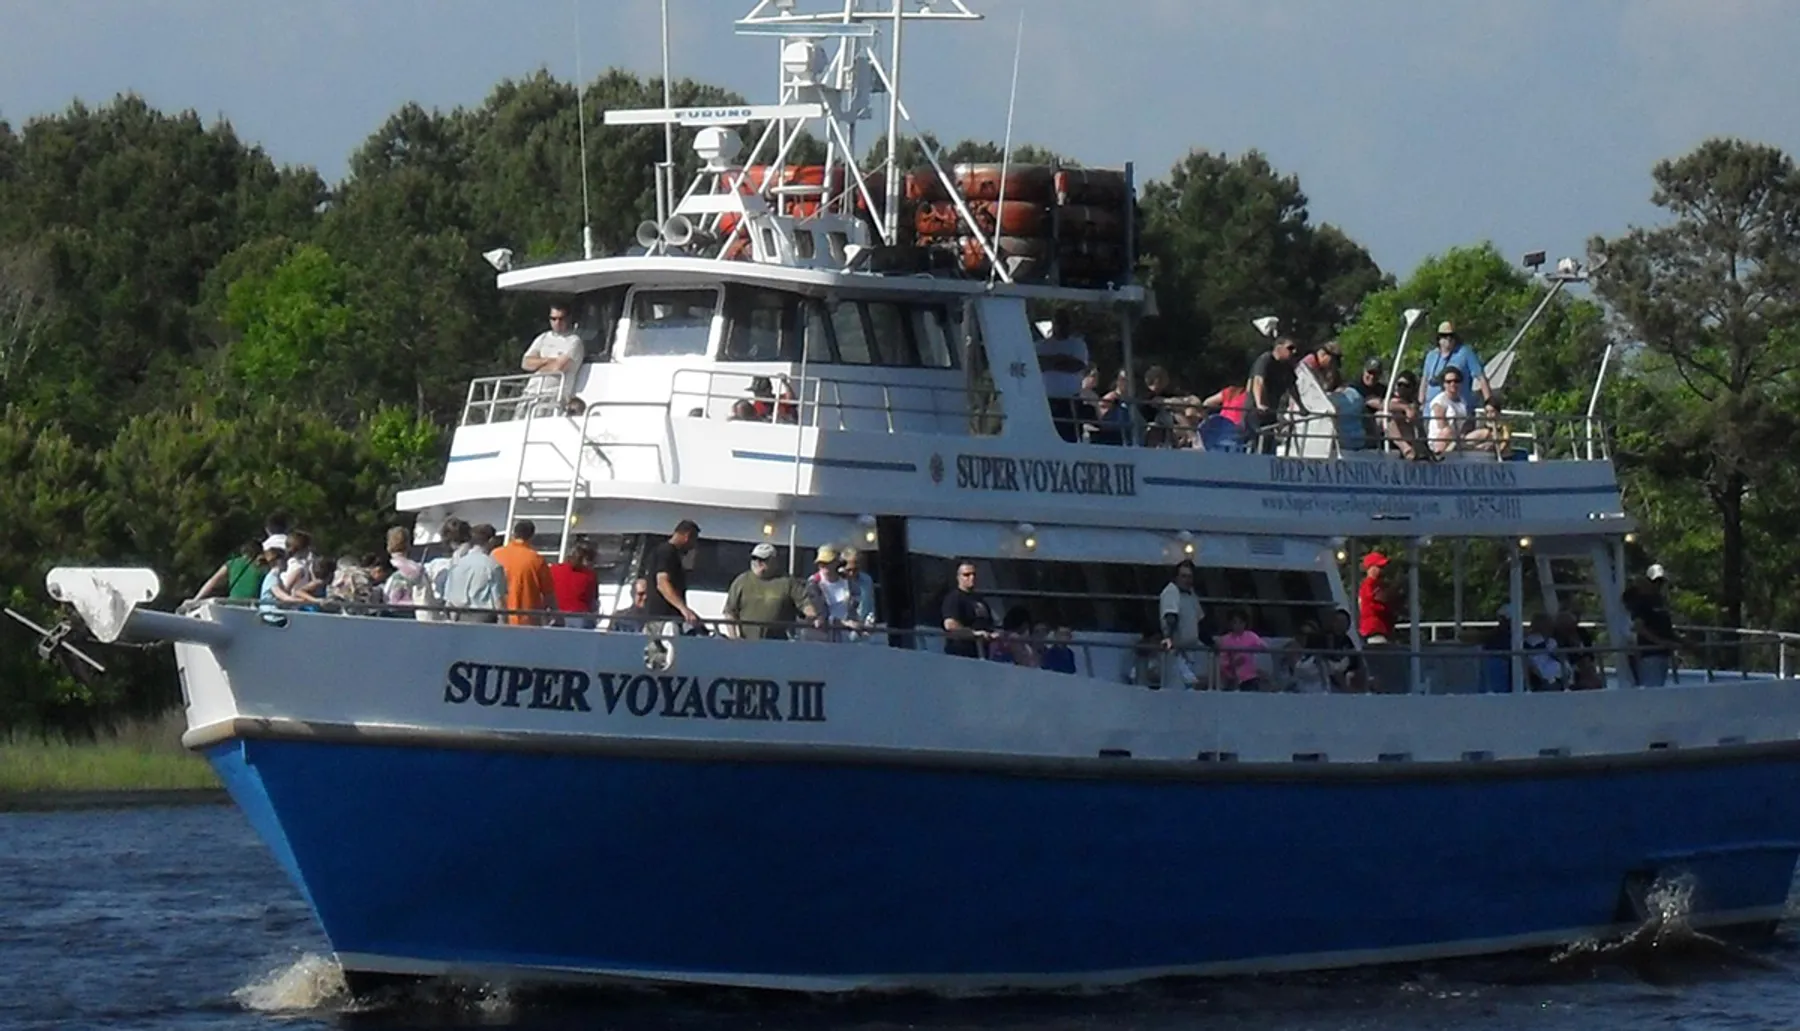 A group of people are on the deck of the SUPER VOYAGER III, a boat designated for deep sea fishing and dolphin cruises.